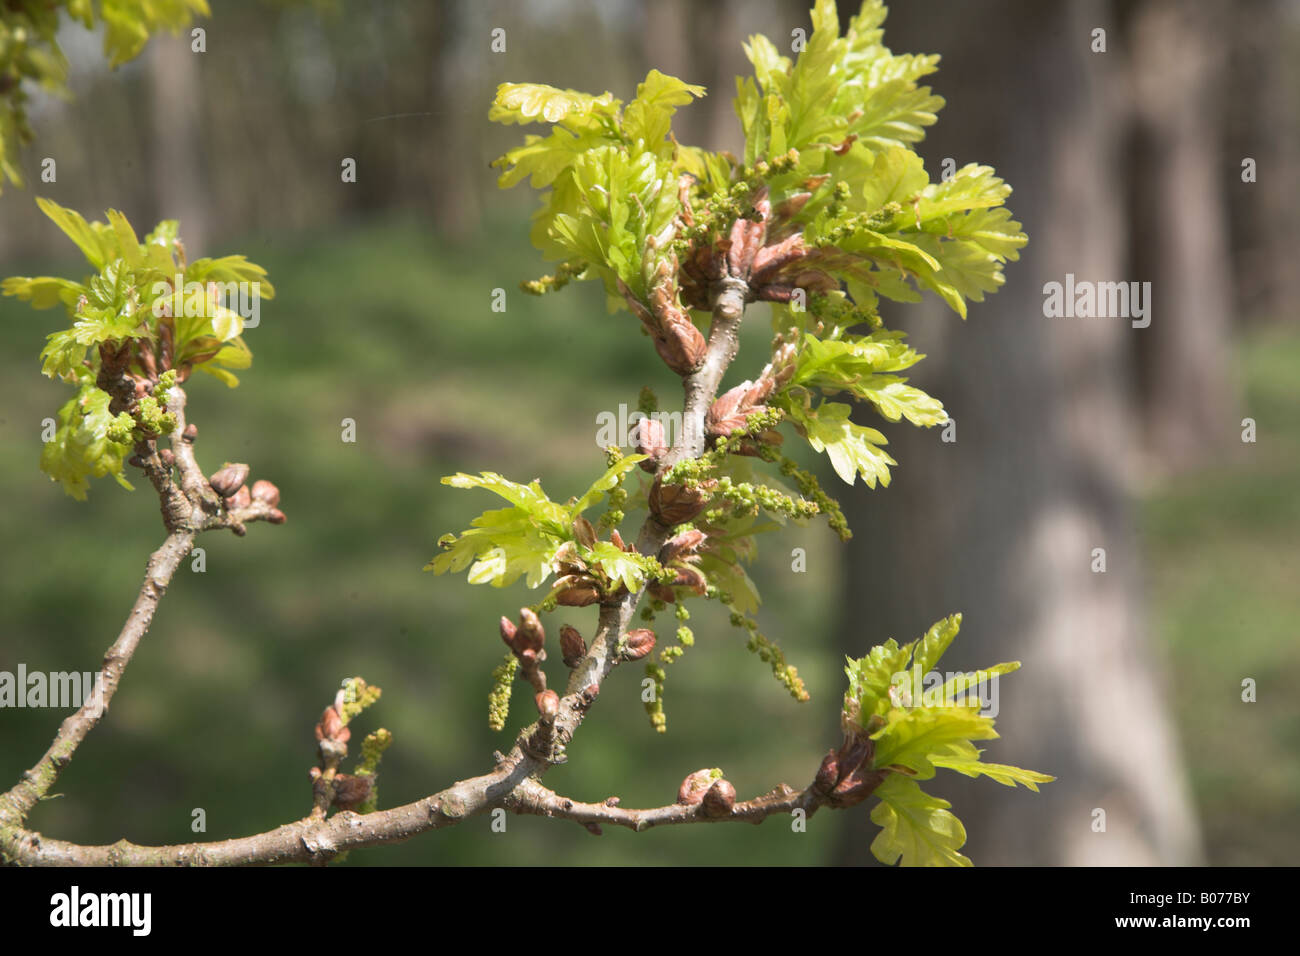 Close up of branch, buds and new leaves on English oak tree Stock Photo